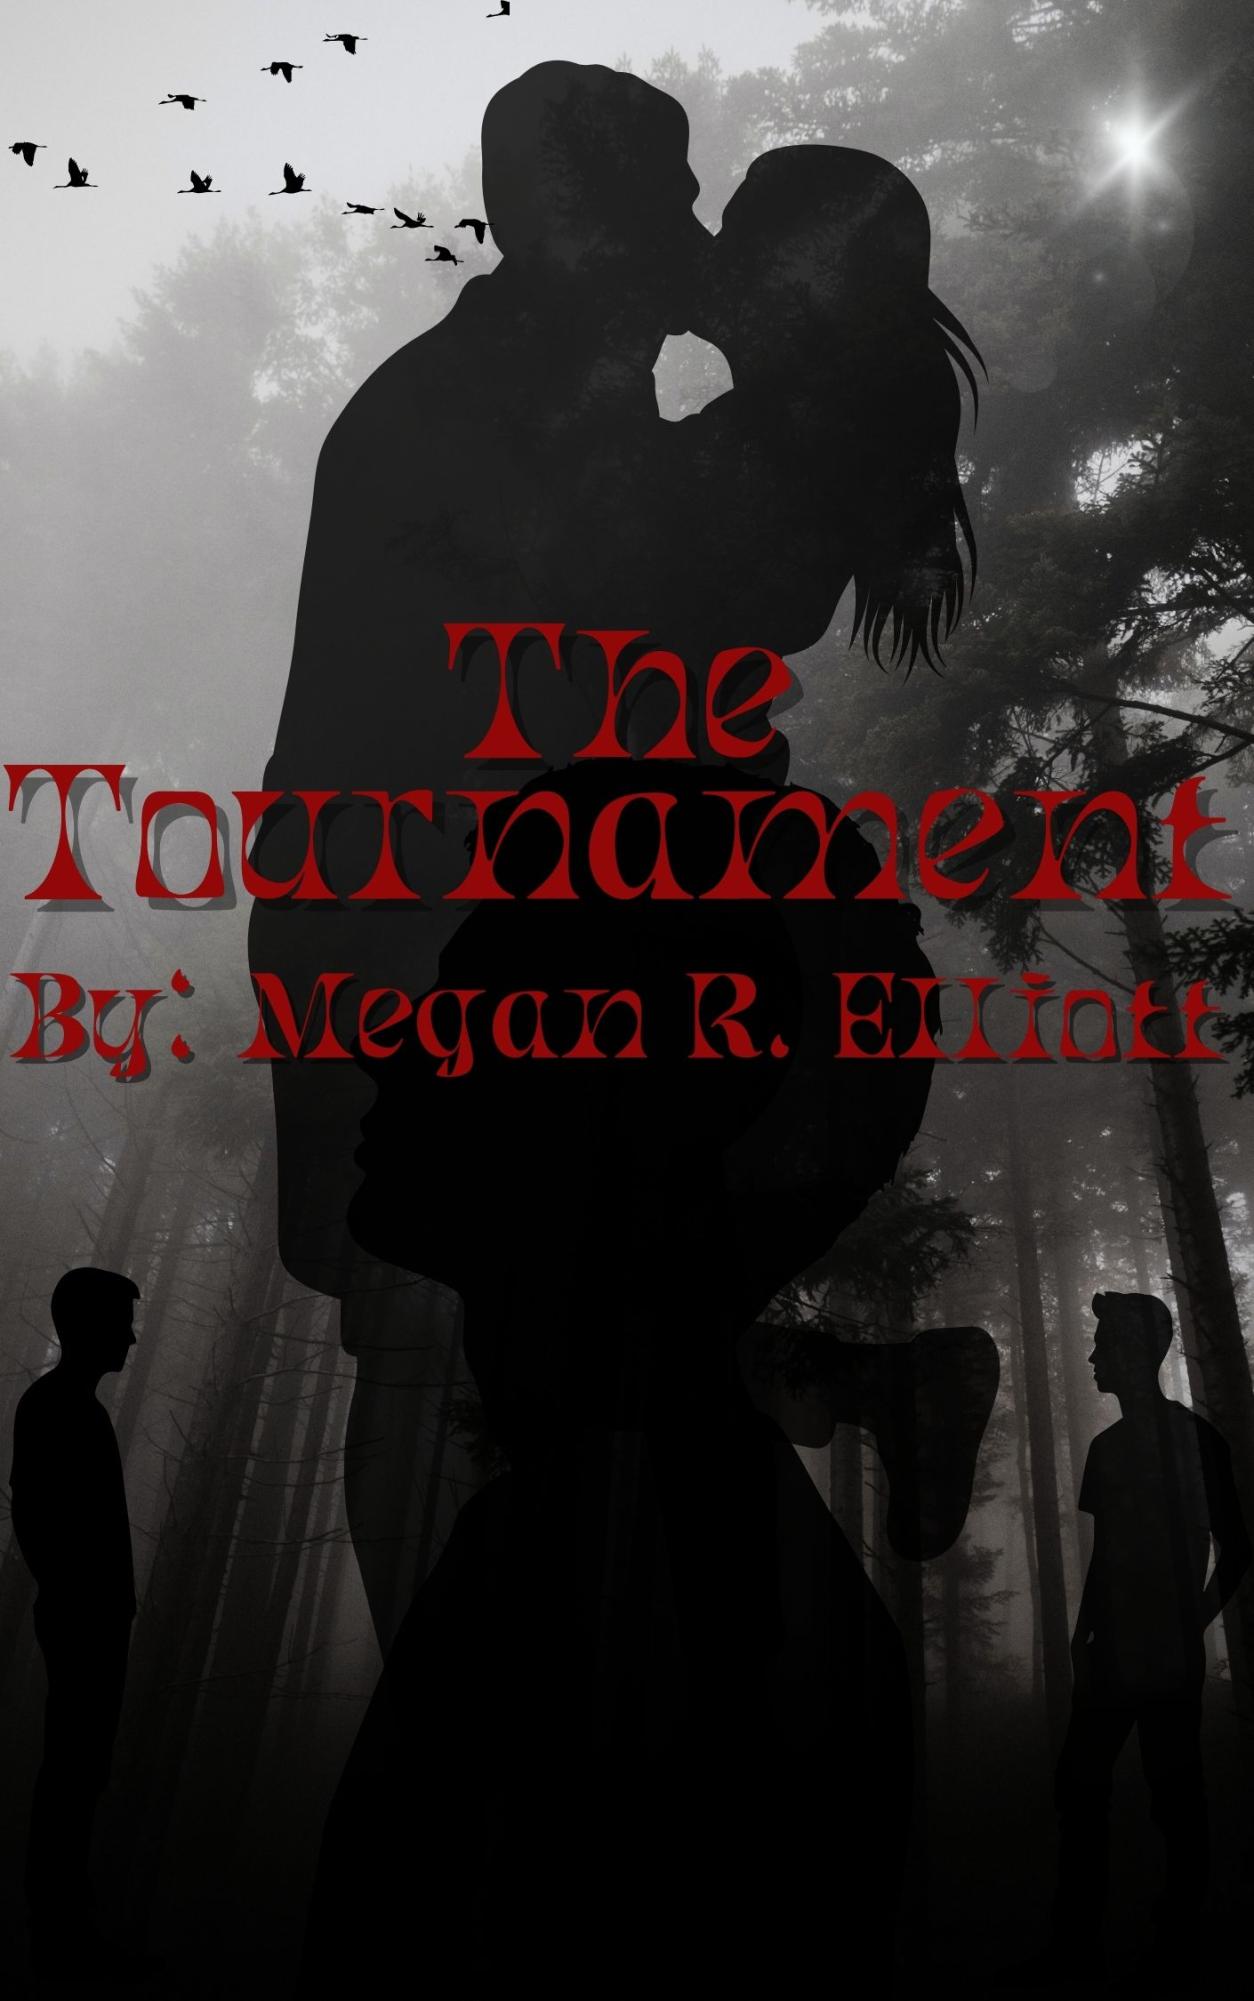 TOURNAMENT READY. Senior Megan Elliott has the cover designed for her novel The Tournament. She worked all month to complete the book as part of nanowrimo, a writing initiative. 